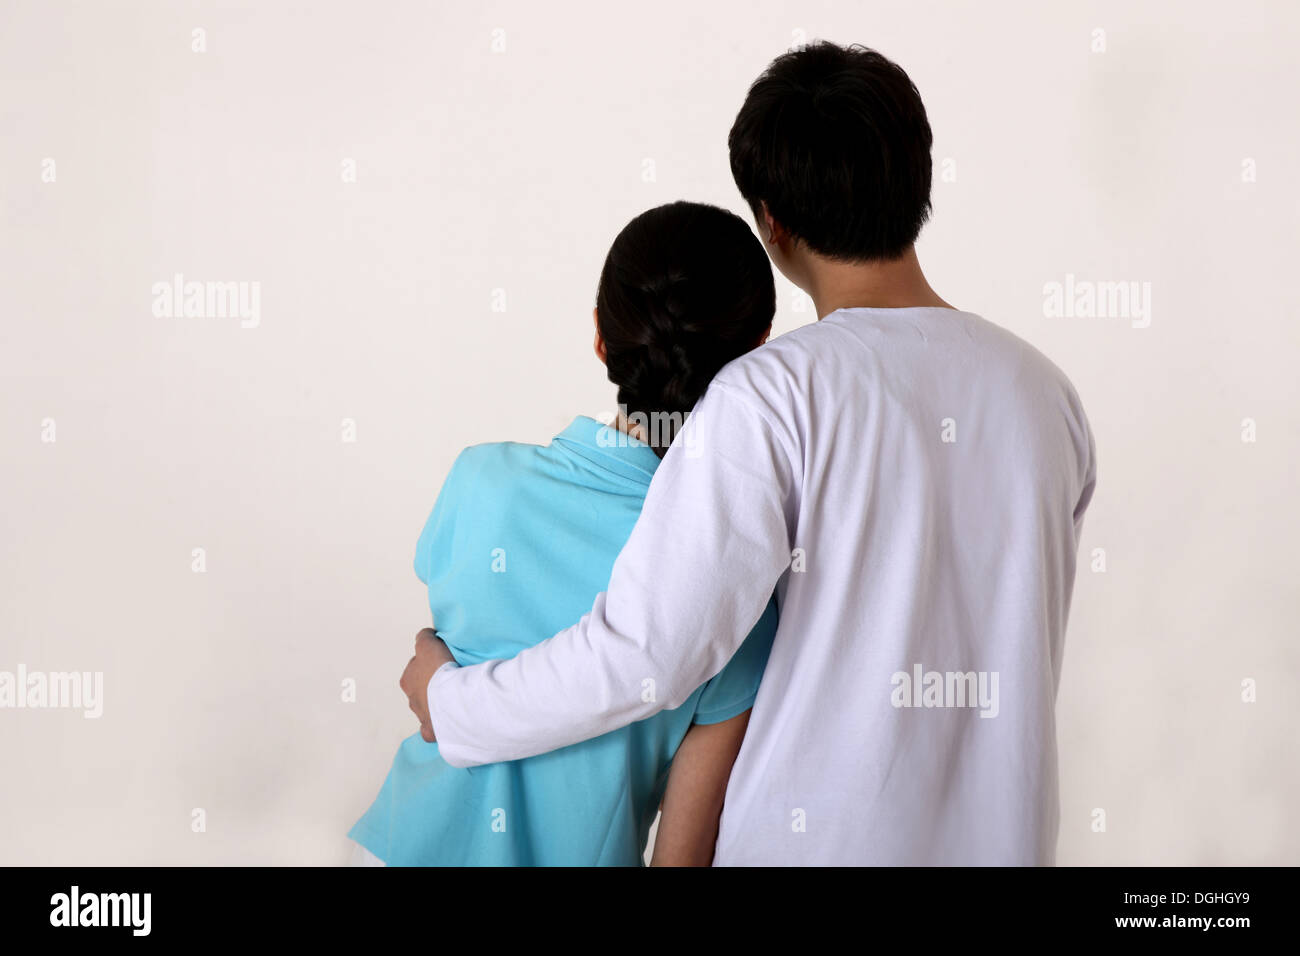 Back view of east Asian couple embracing Stock Photo